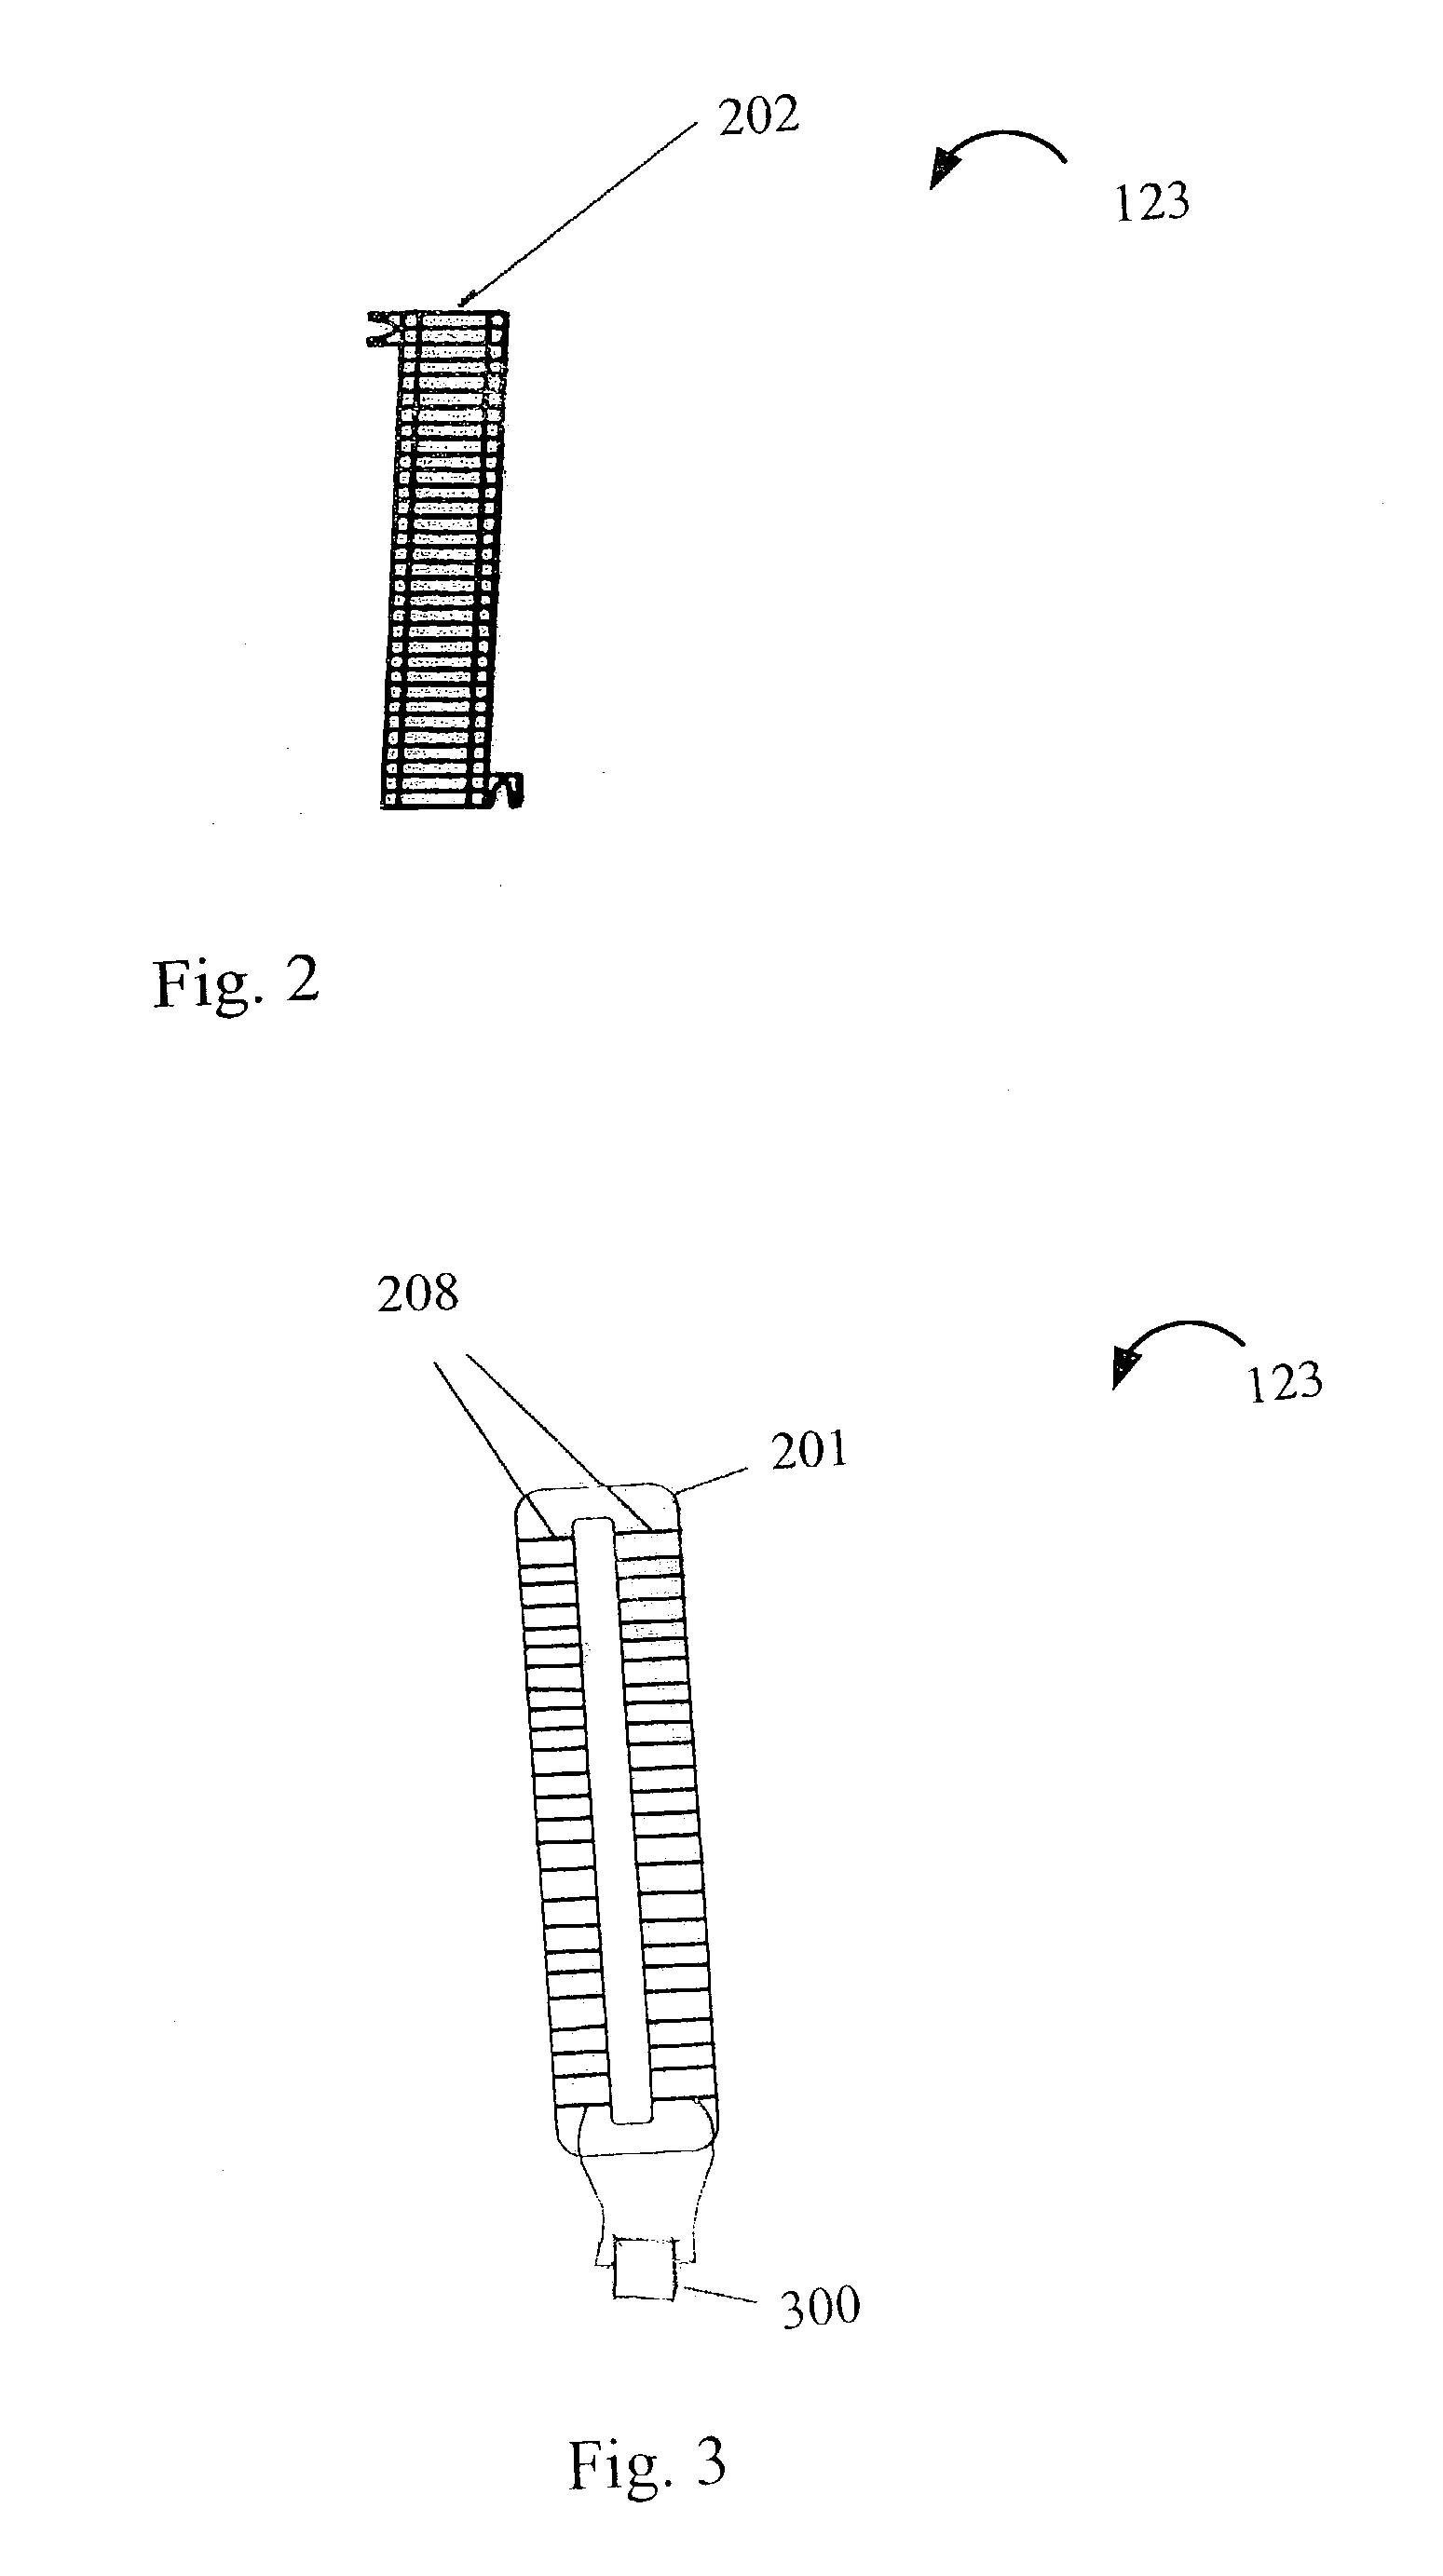 Methods and apparatus for a bridge tap moderator